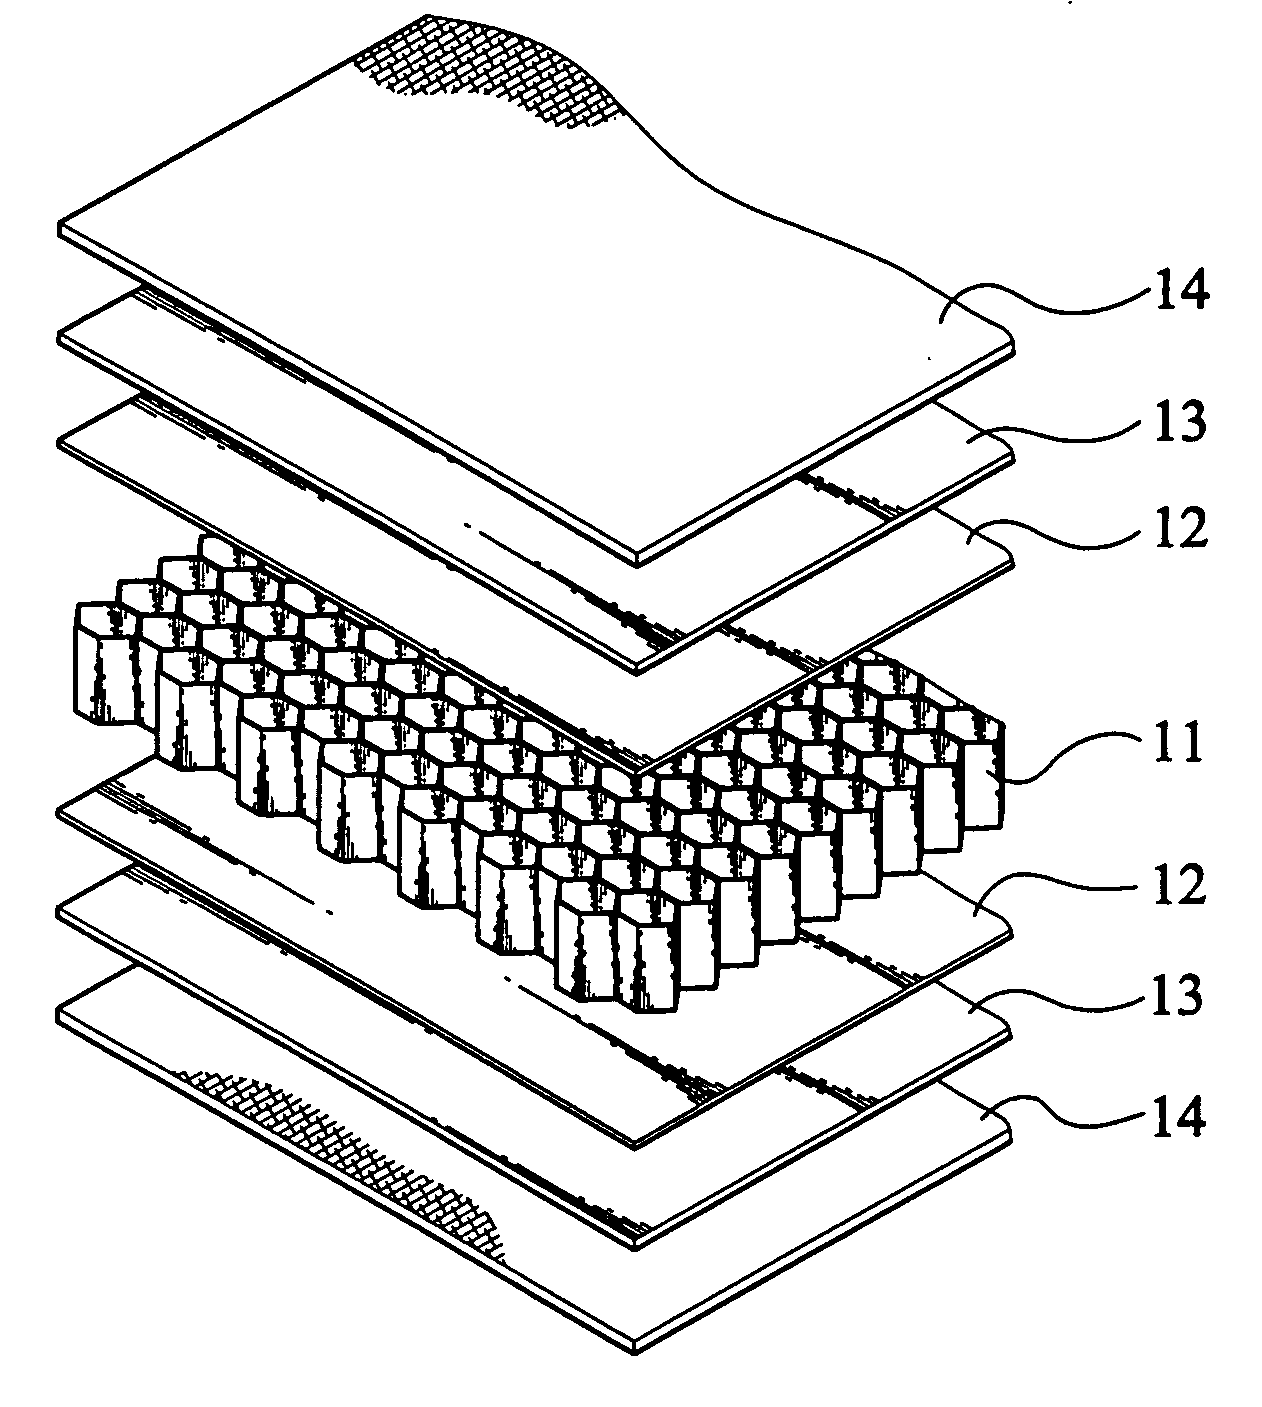 Sealing of honeycomb core and the honeycomb core assembly made with the same